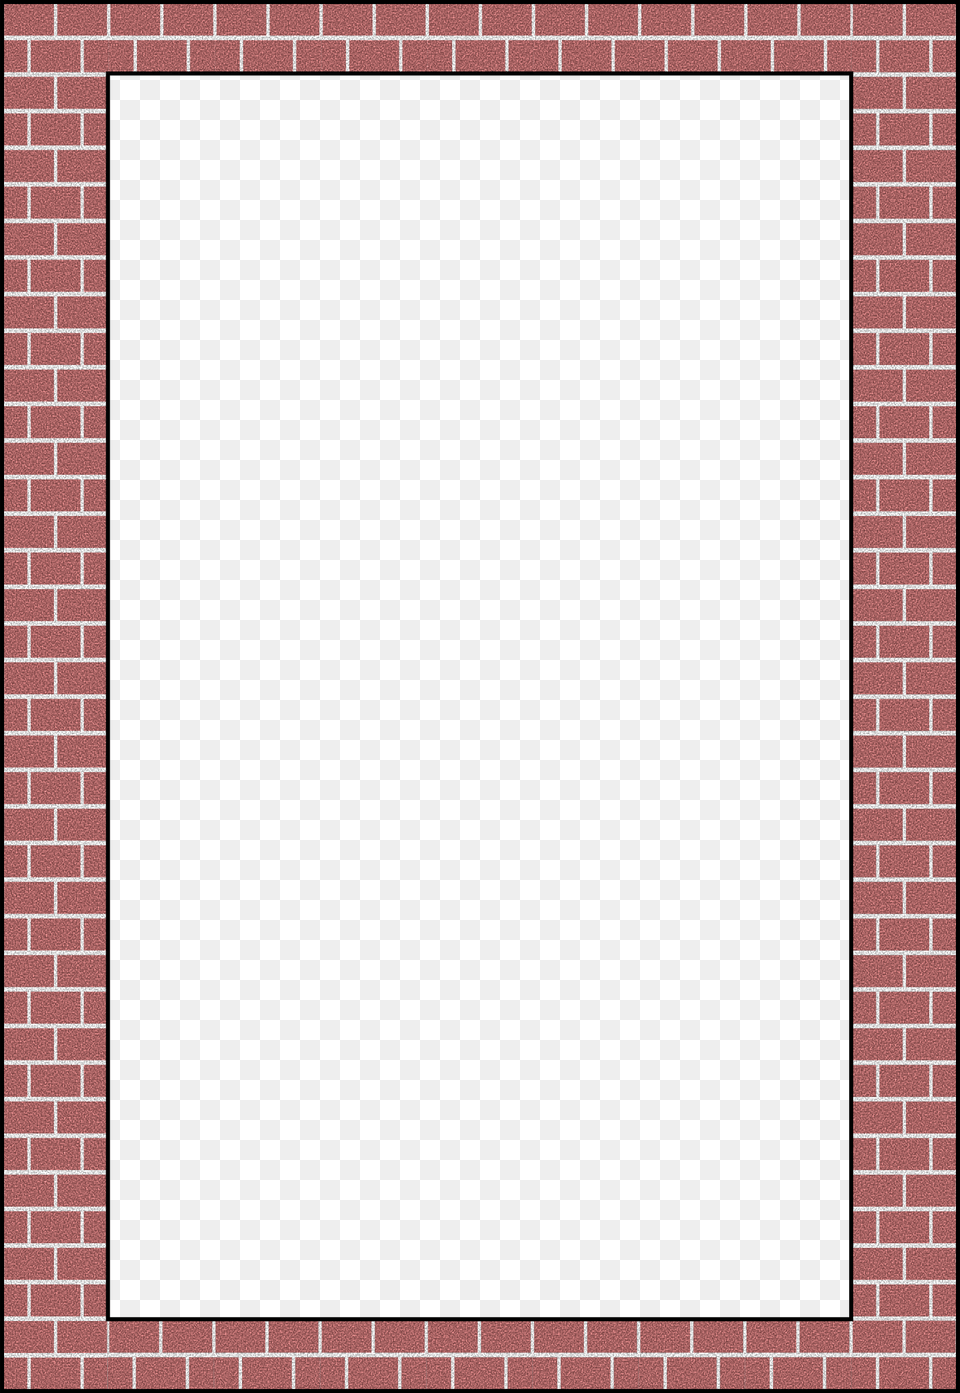 This Icons Design Of Brick Border, Architecture, Building, Wall, Blackboard Free Png Download